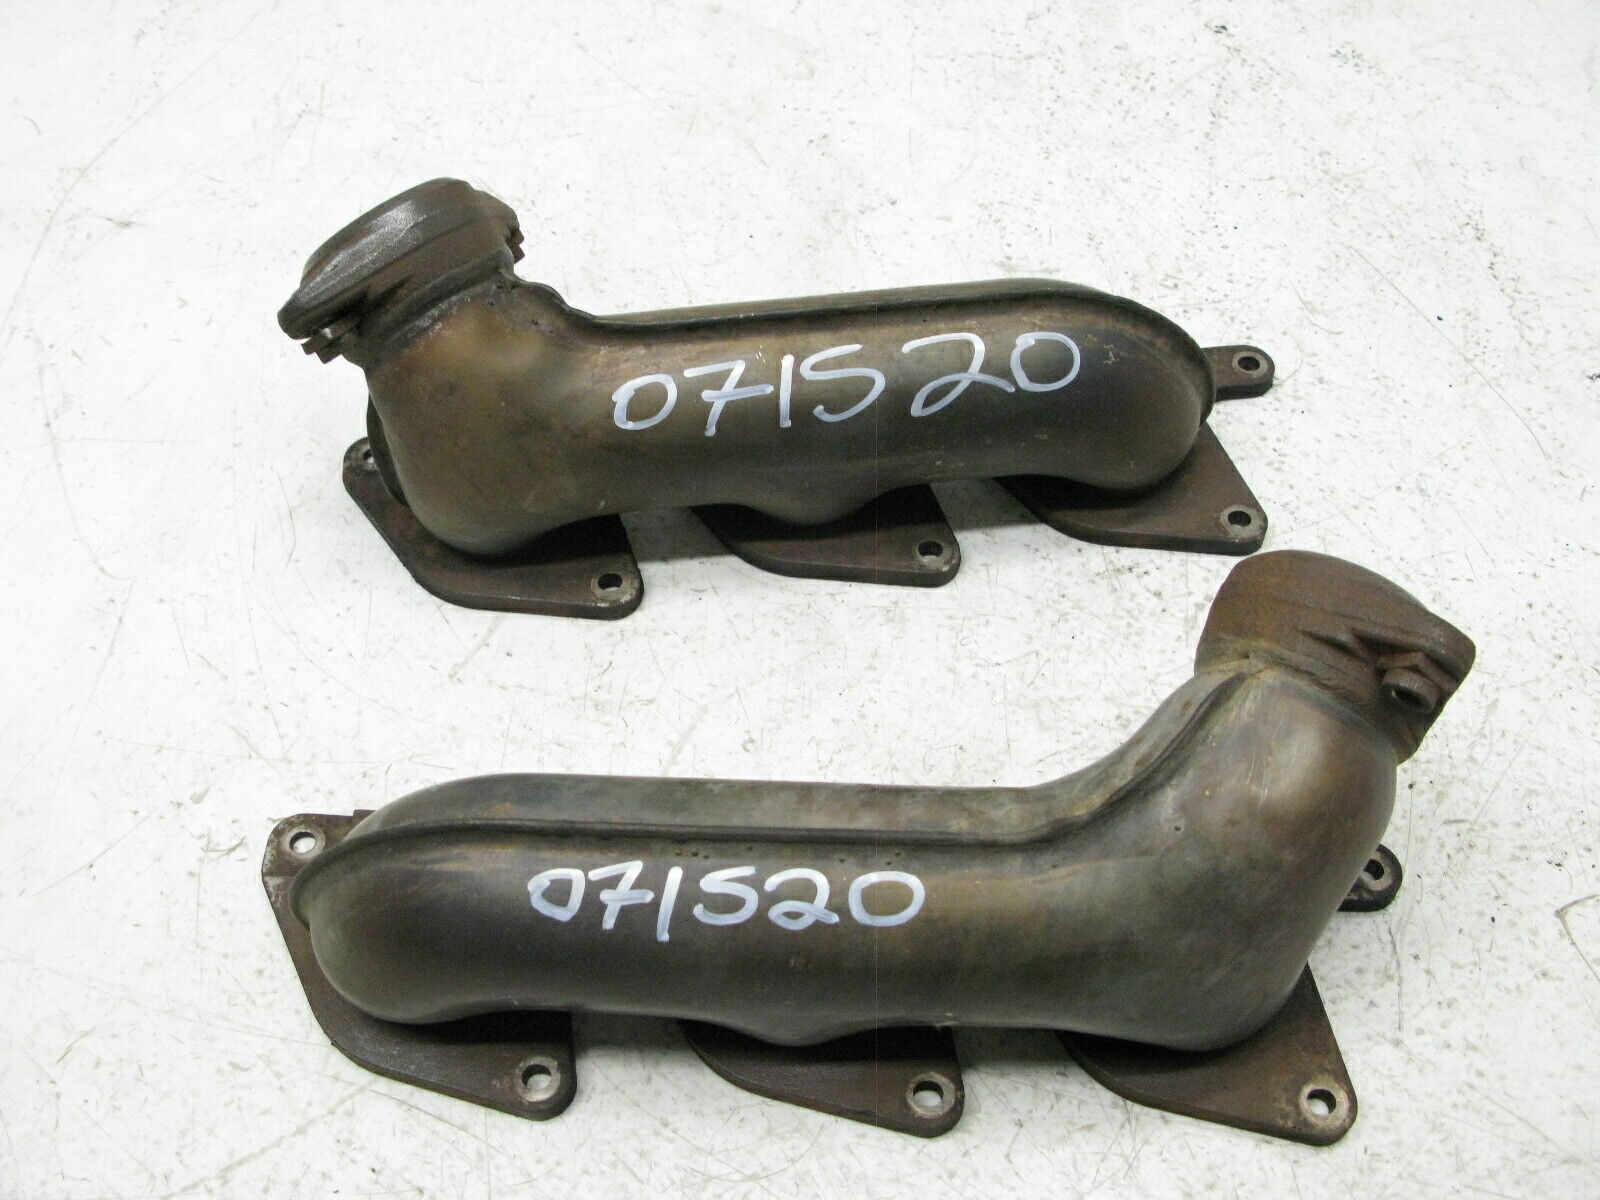 06-11 MERCEDES W251 R350 ML350 LEFT RIGHT EXHAUST MANIFOLD HEADERS 071520